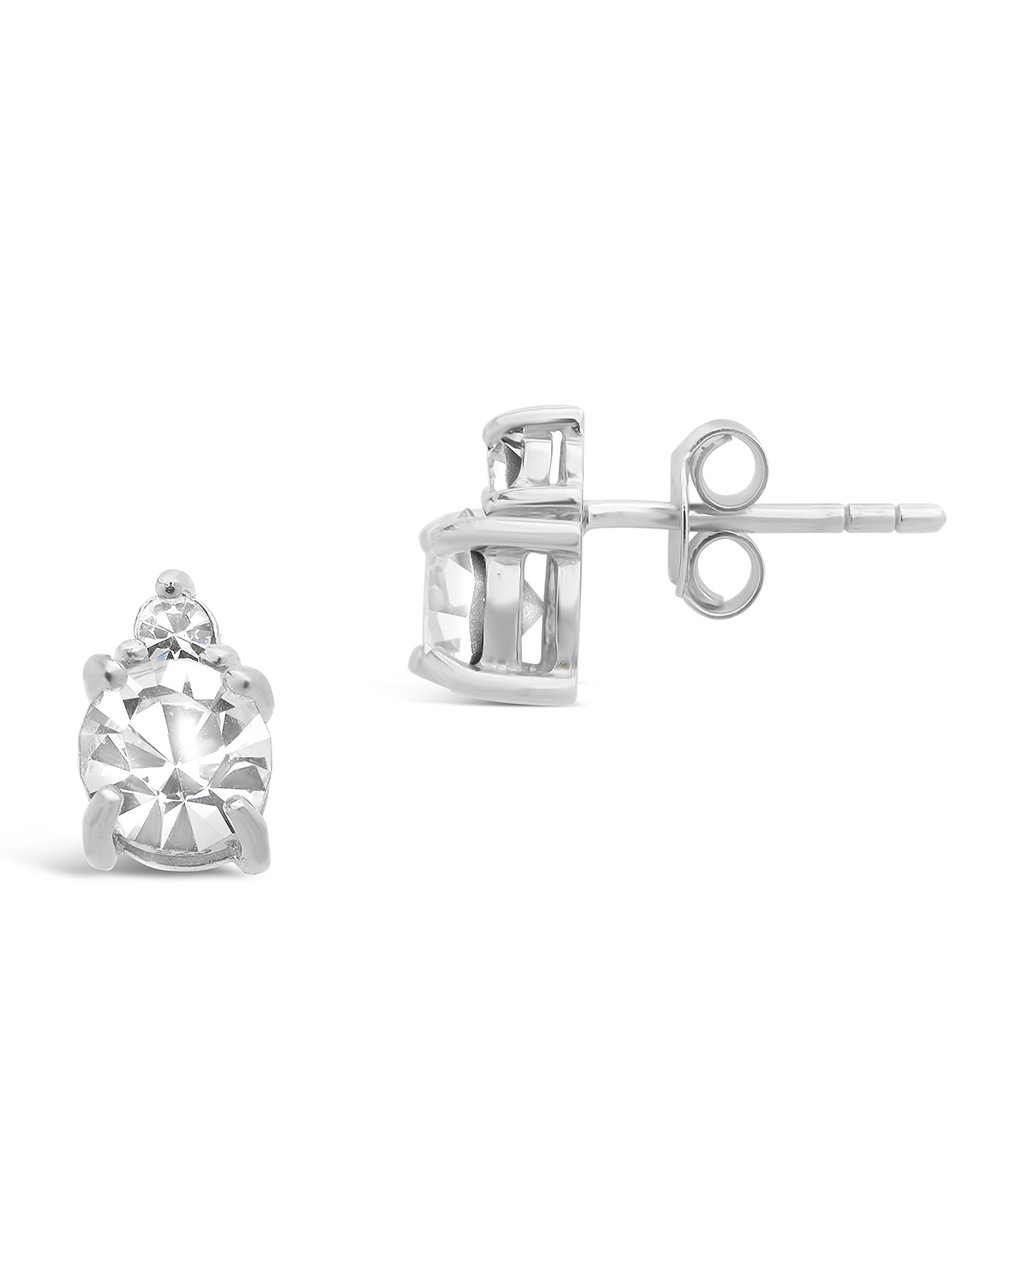 Sterling Silver Birthstone Studs Earring Sterling Forever Silver April / Diamond 